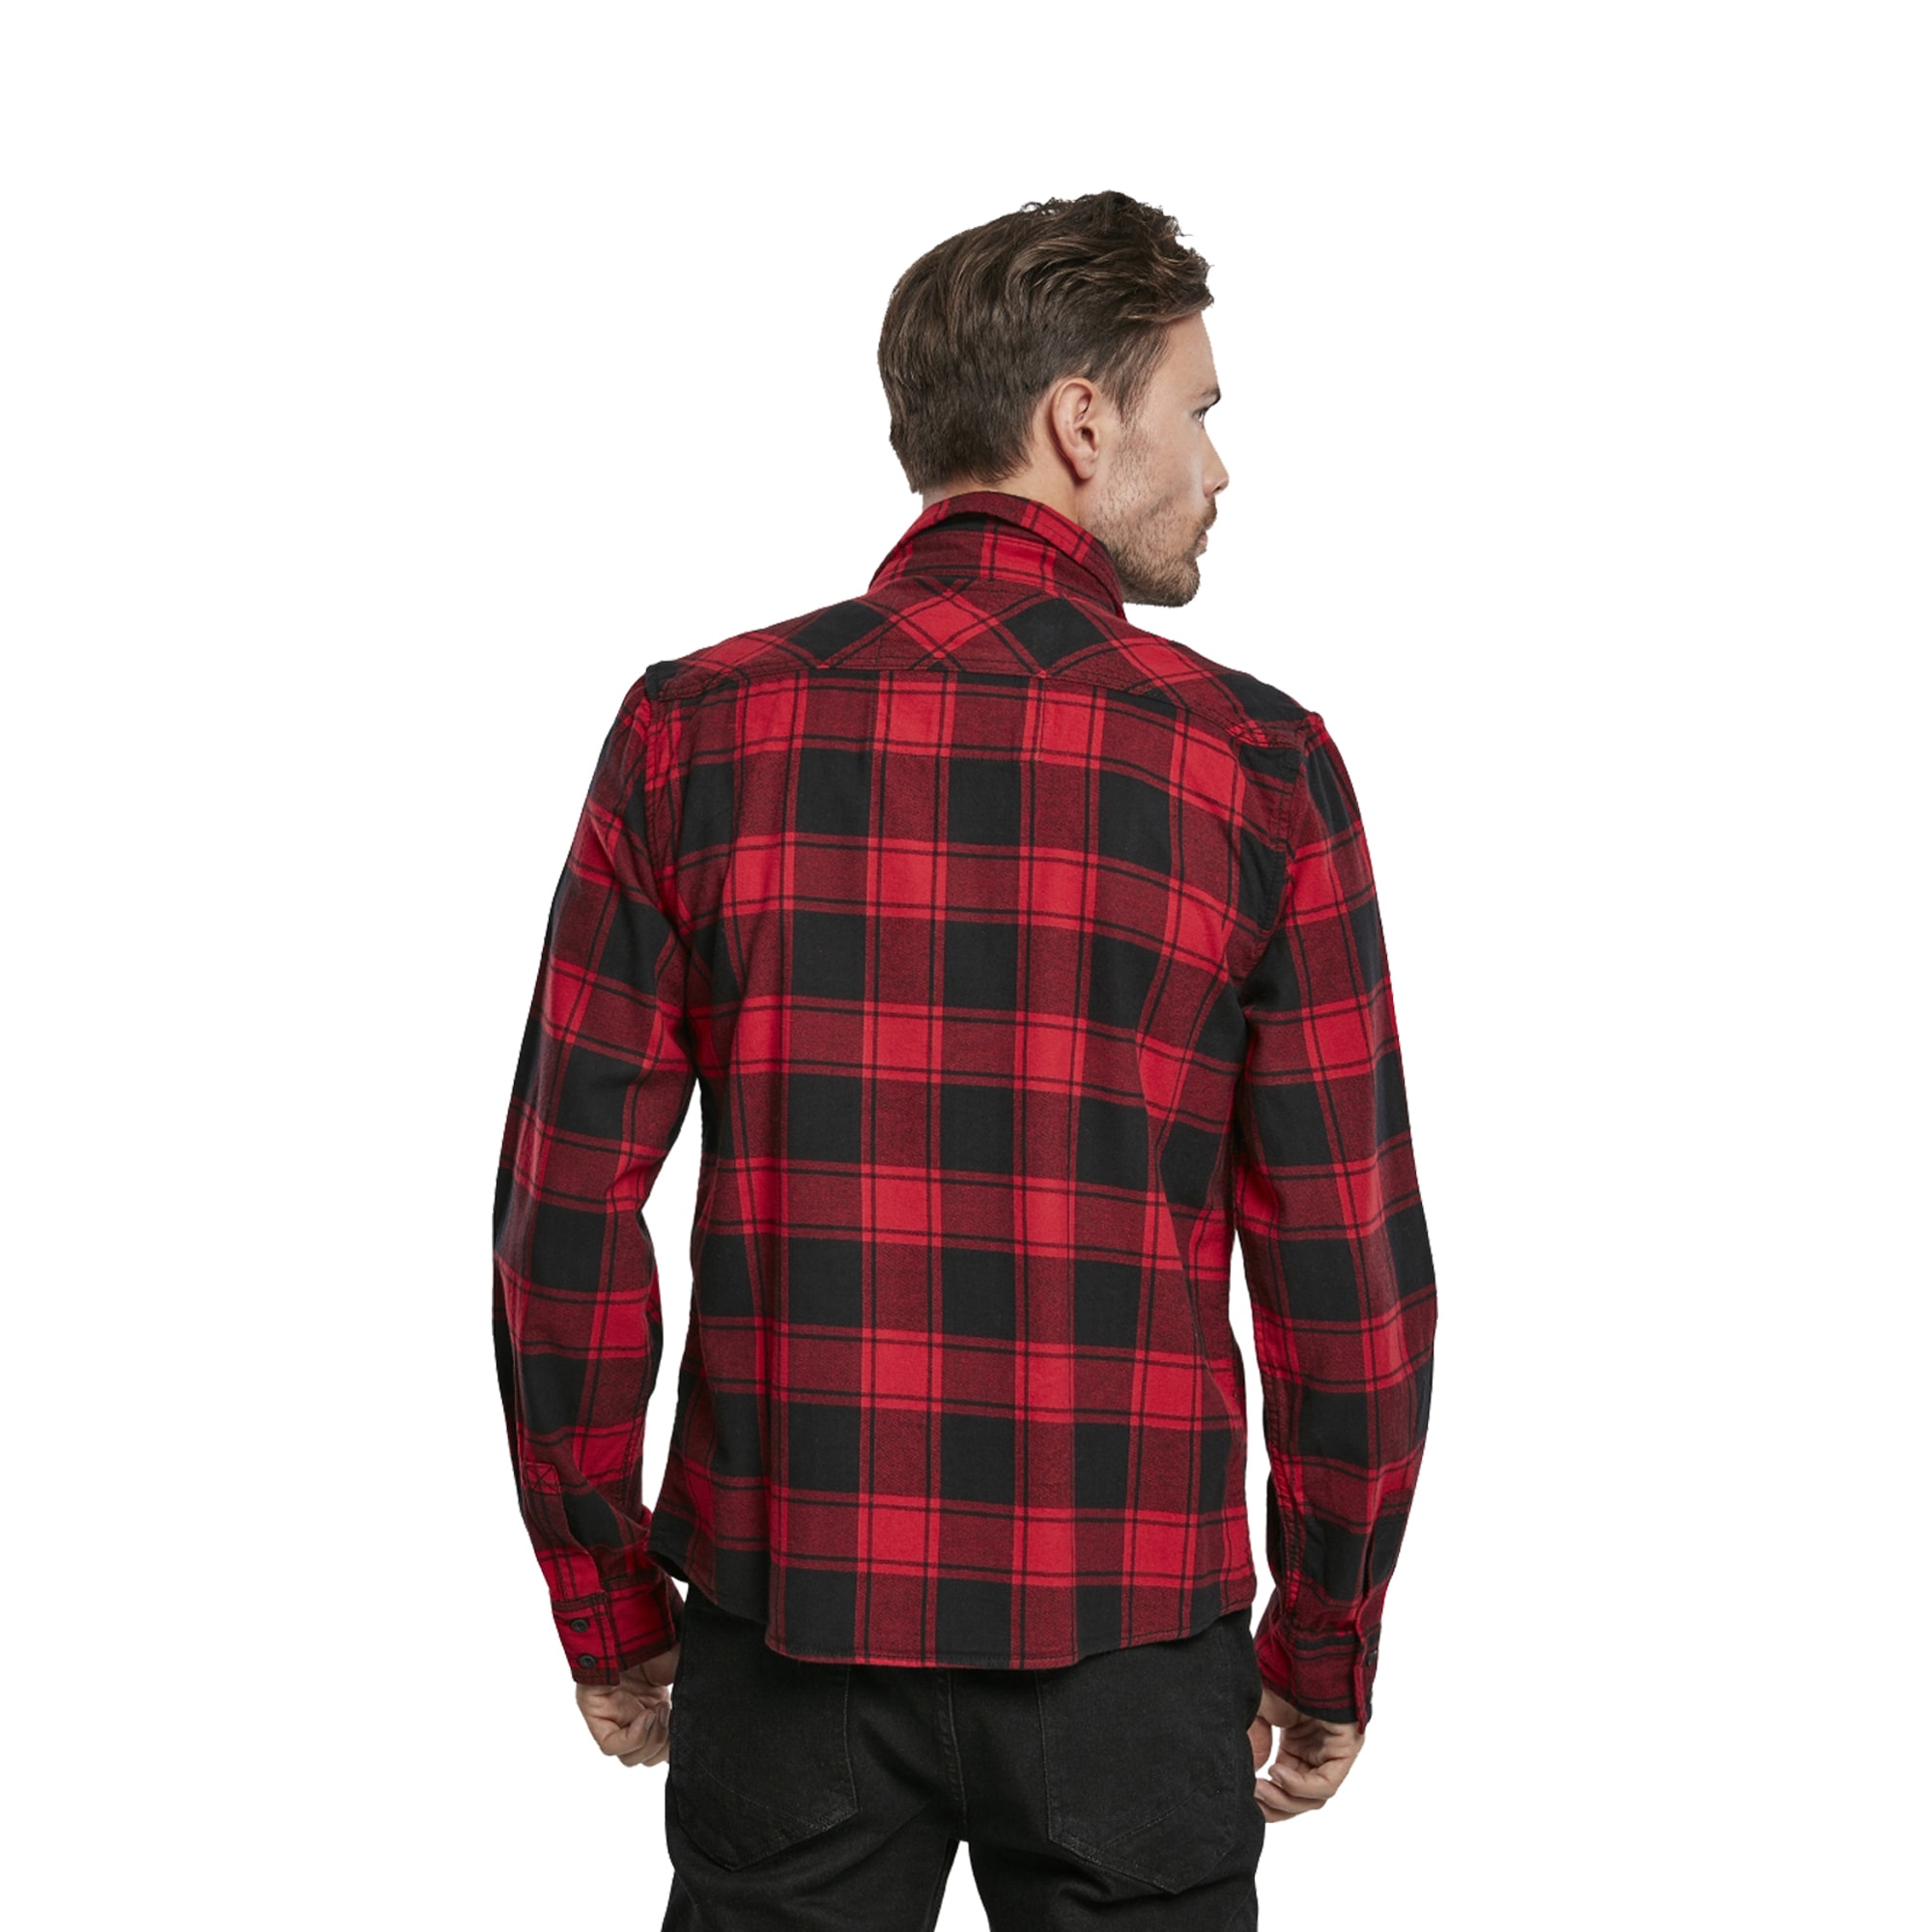 black red ASMC Check Brandit the Purchase by Shirt